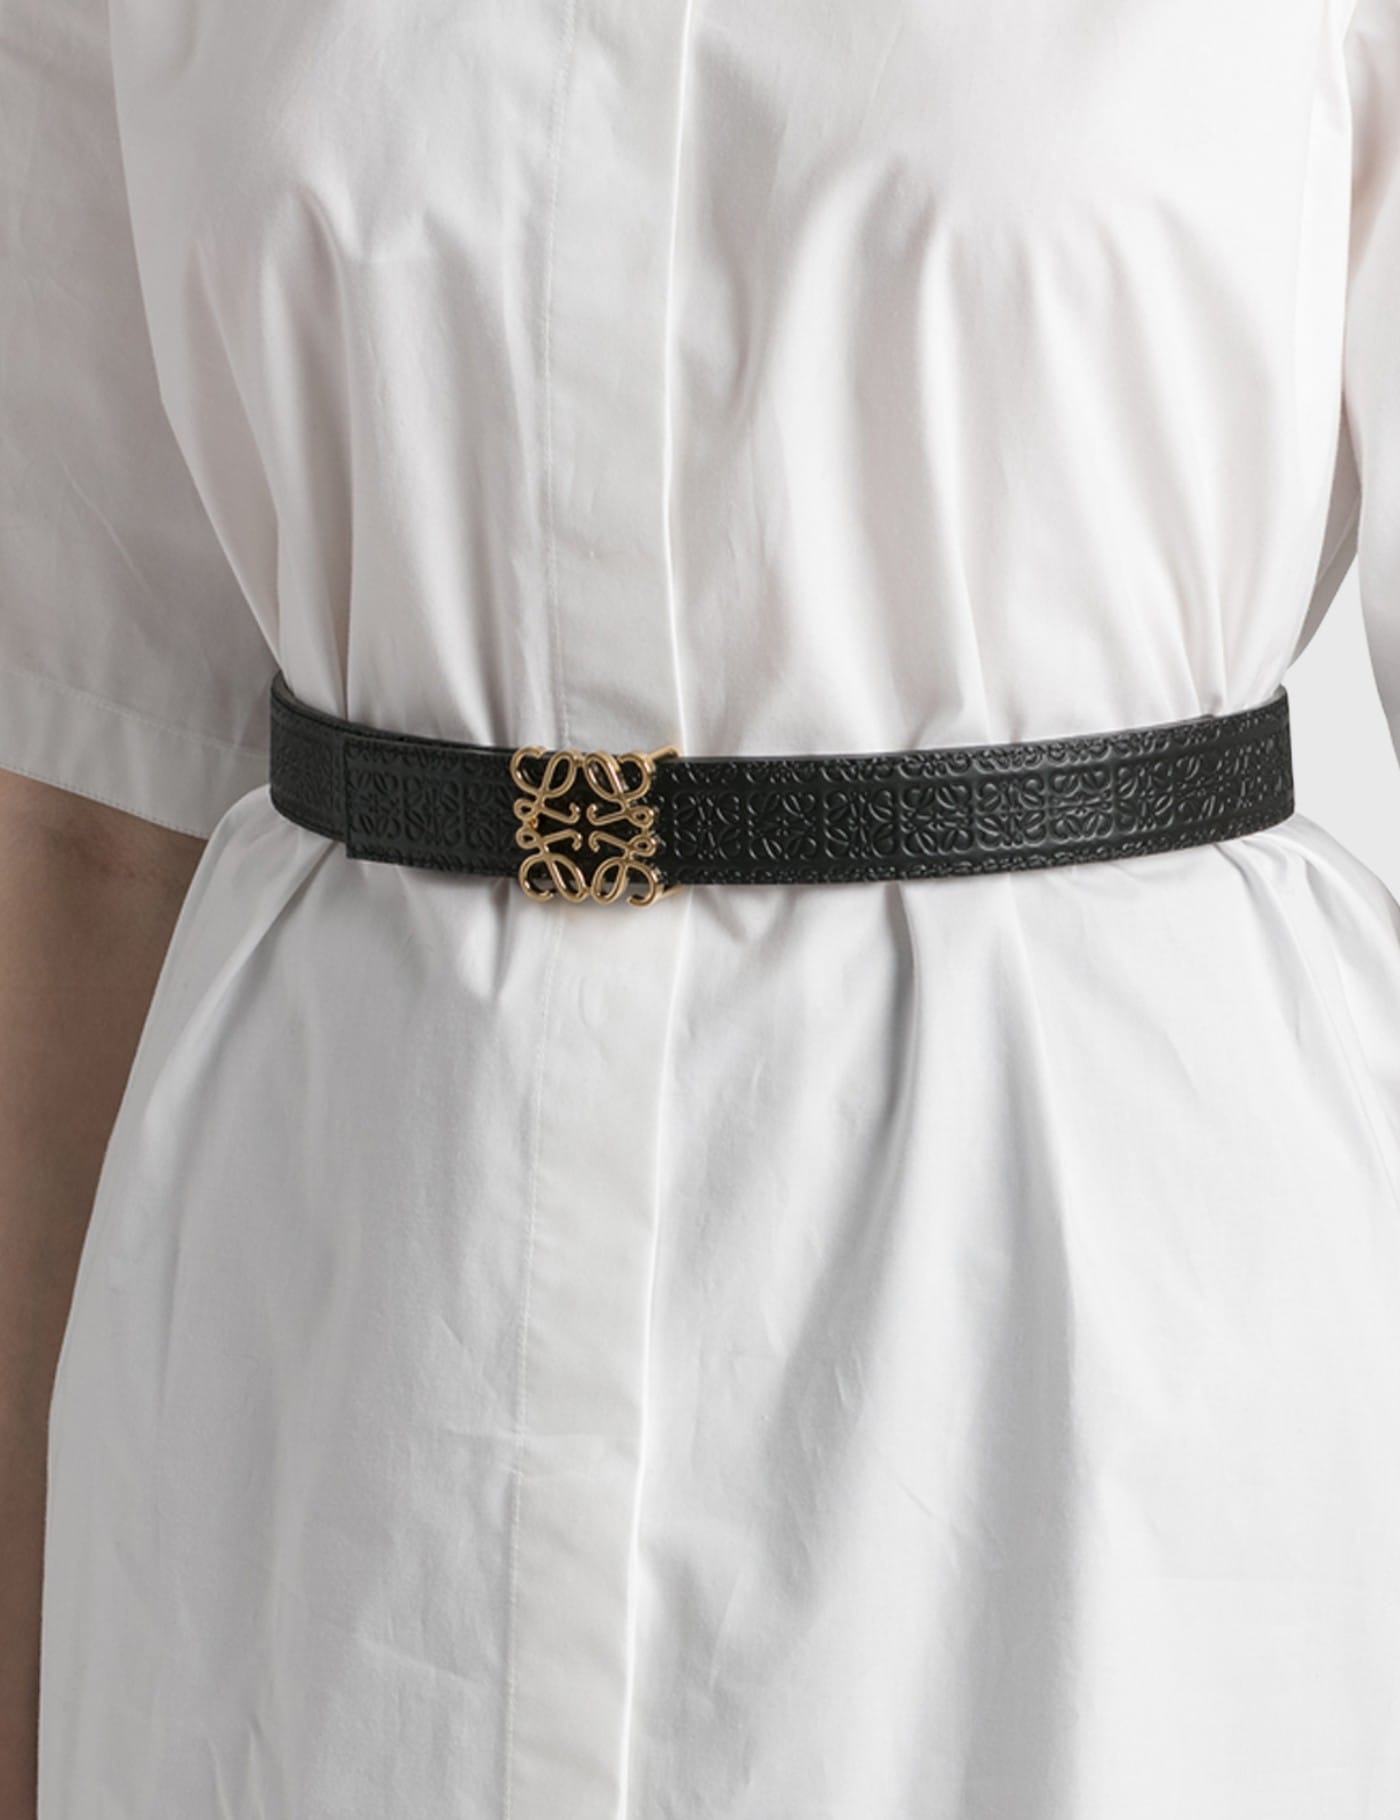 Loewe - Reversible Repeat Belt | HBX - Globally Curated Fashion